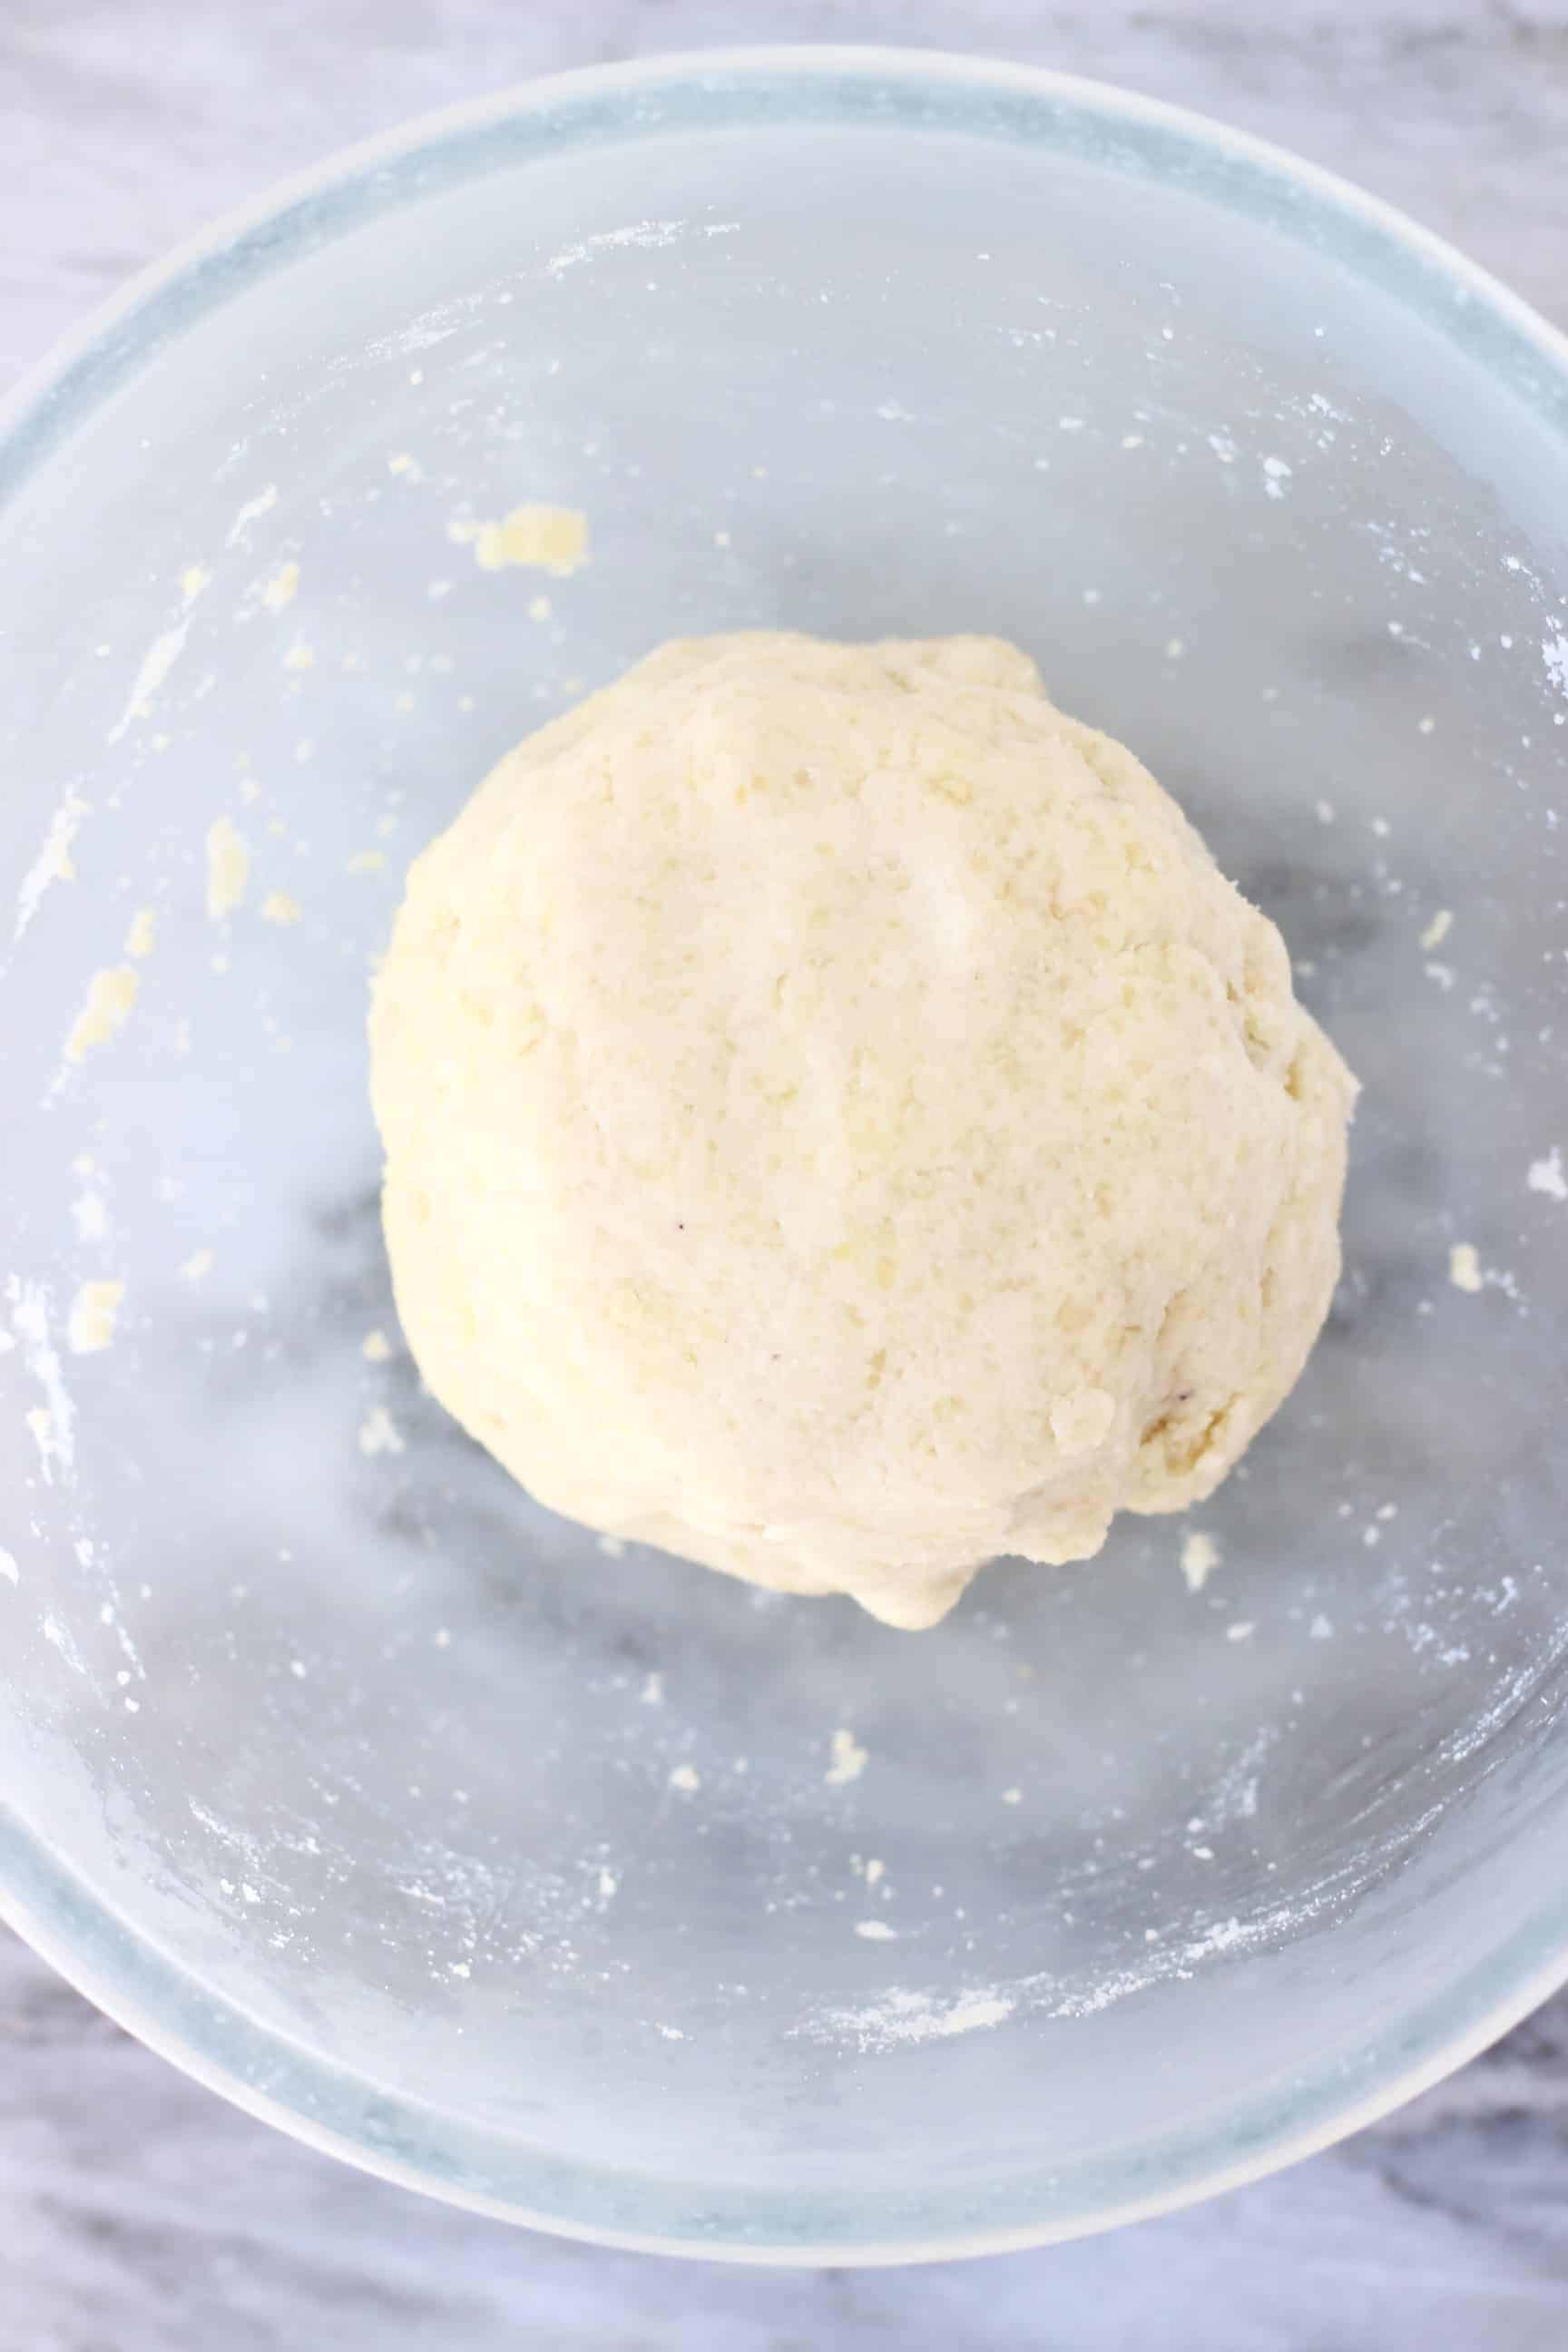 Gluten-free vegan pastry dough in a glass mixing bowl against a marble background